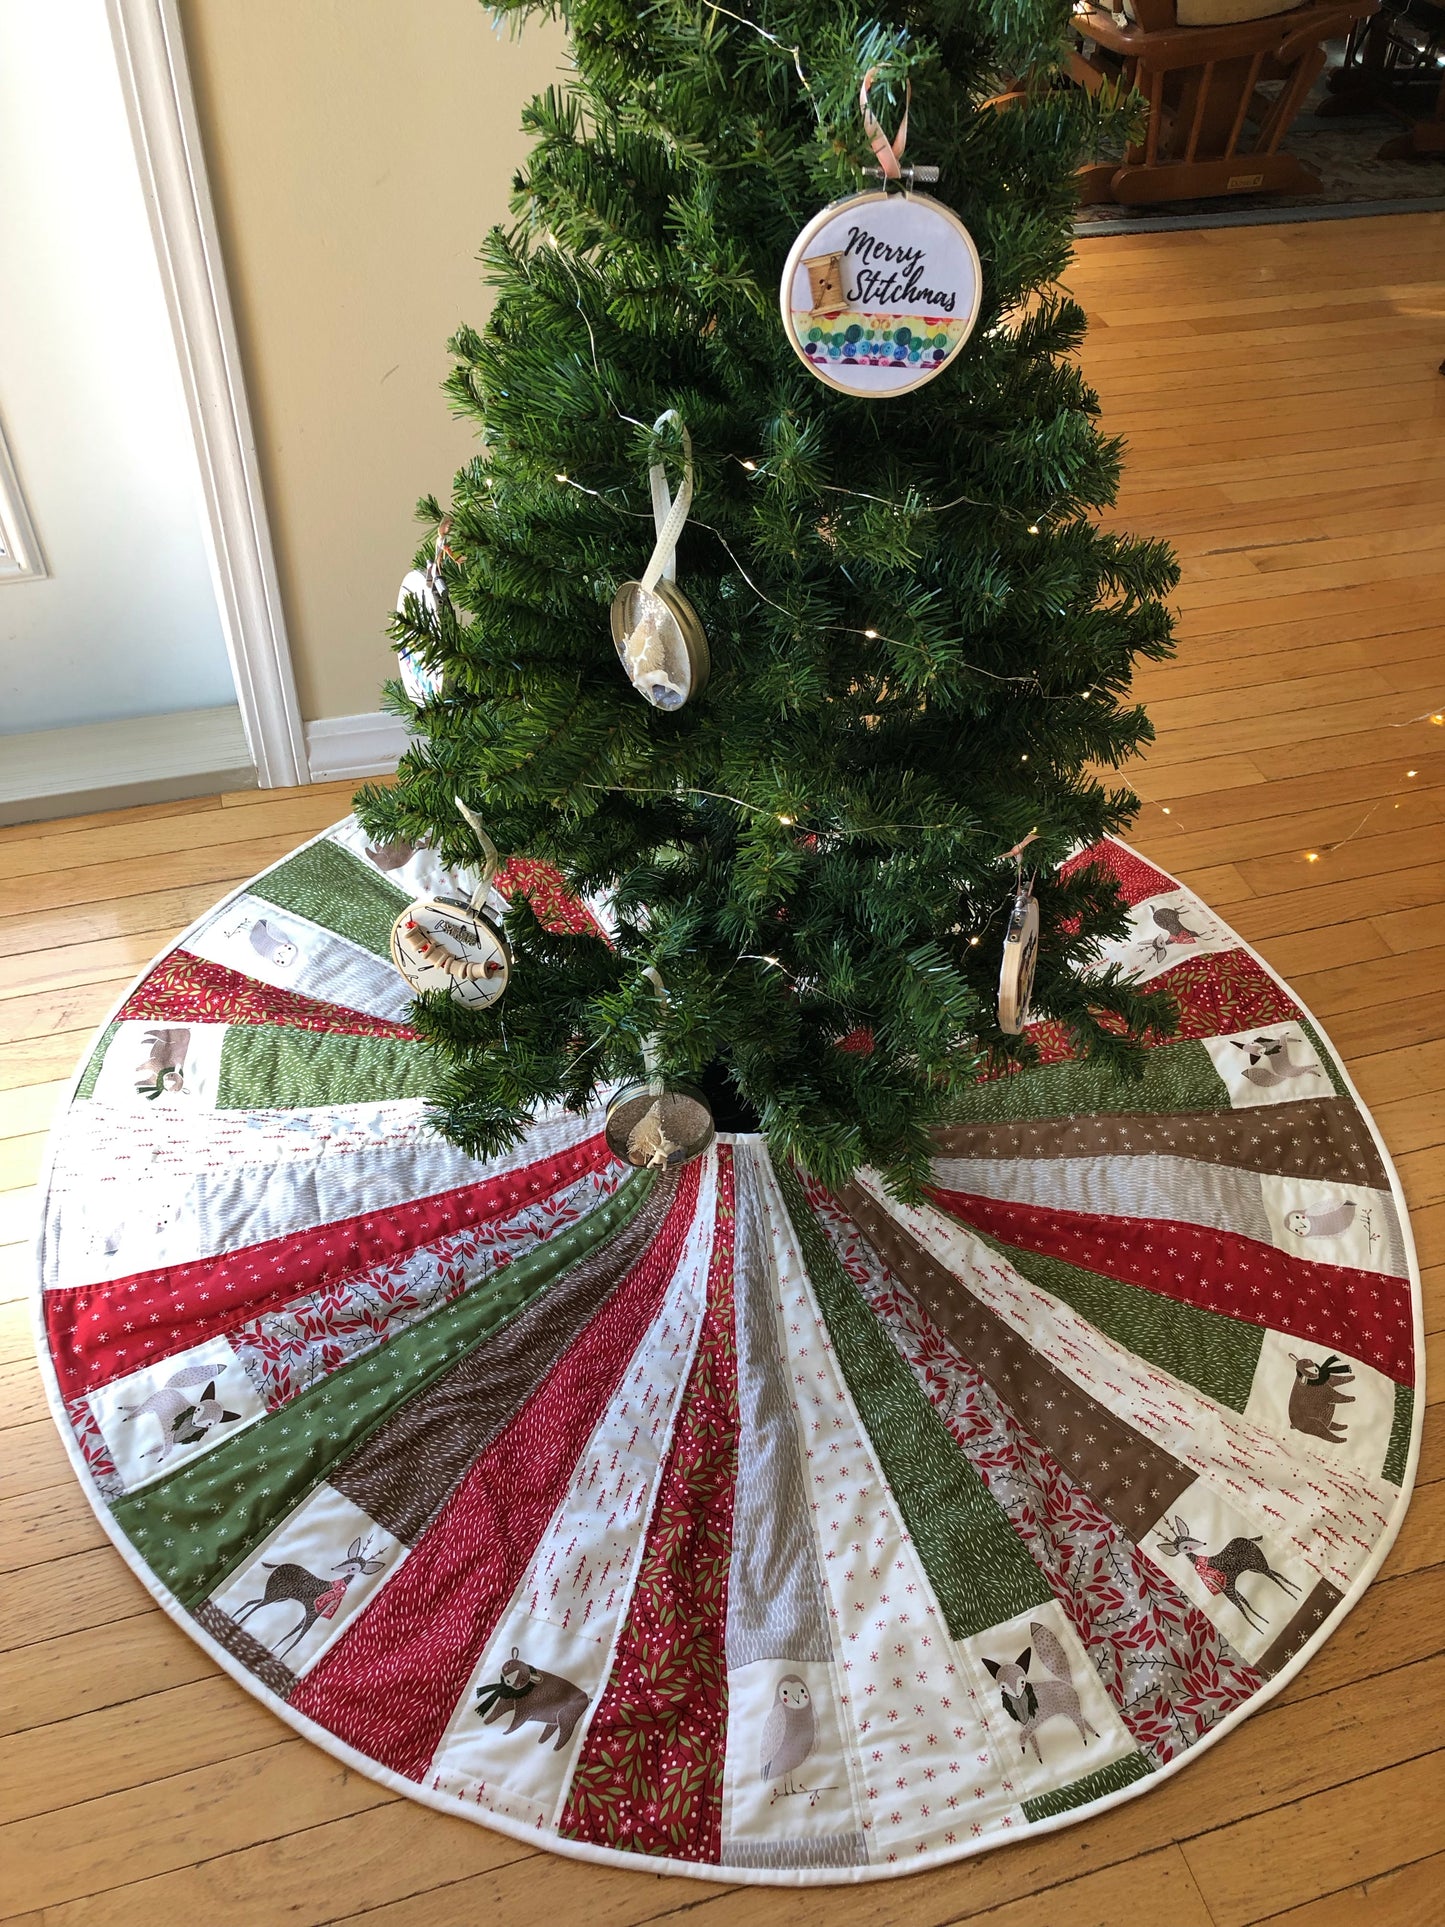 Woodland Christmas Tree Skirt Quilted, Merriment Fabric